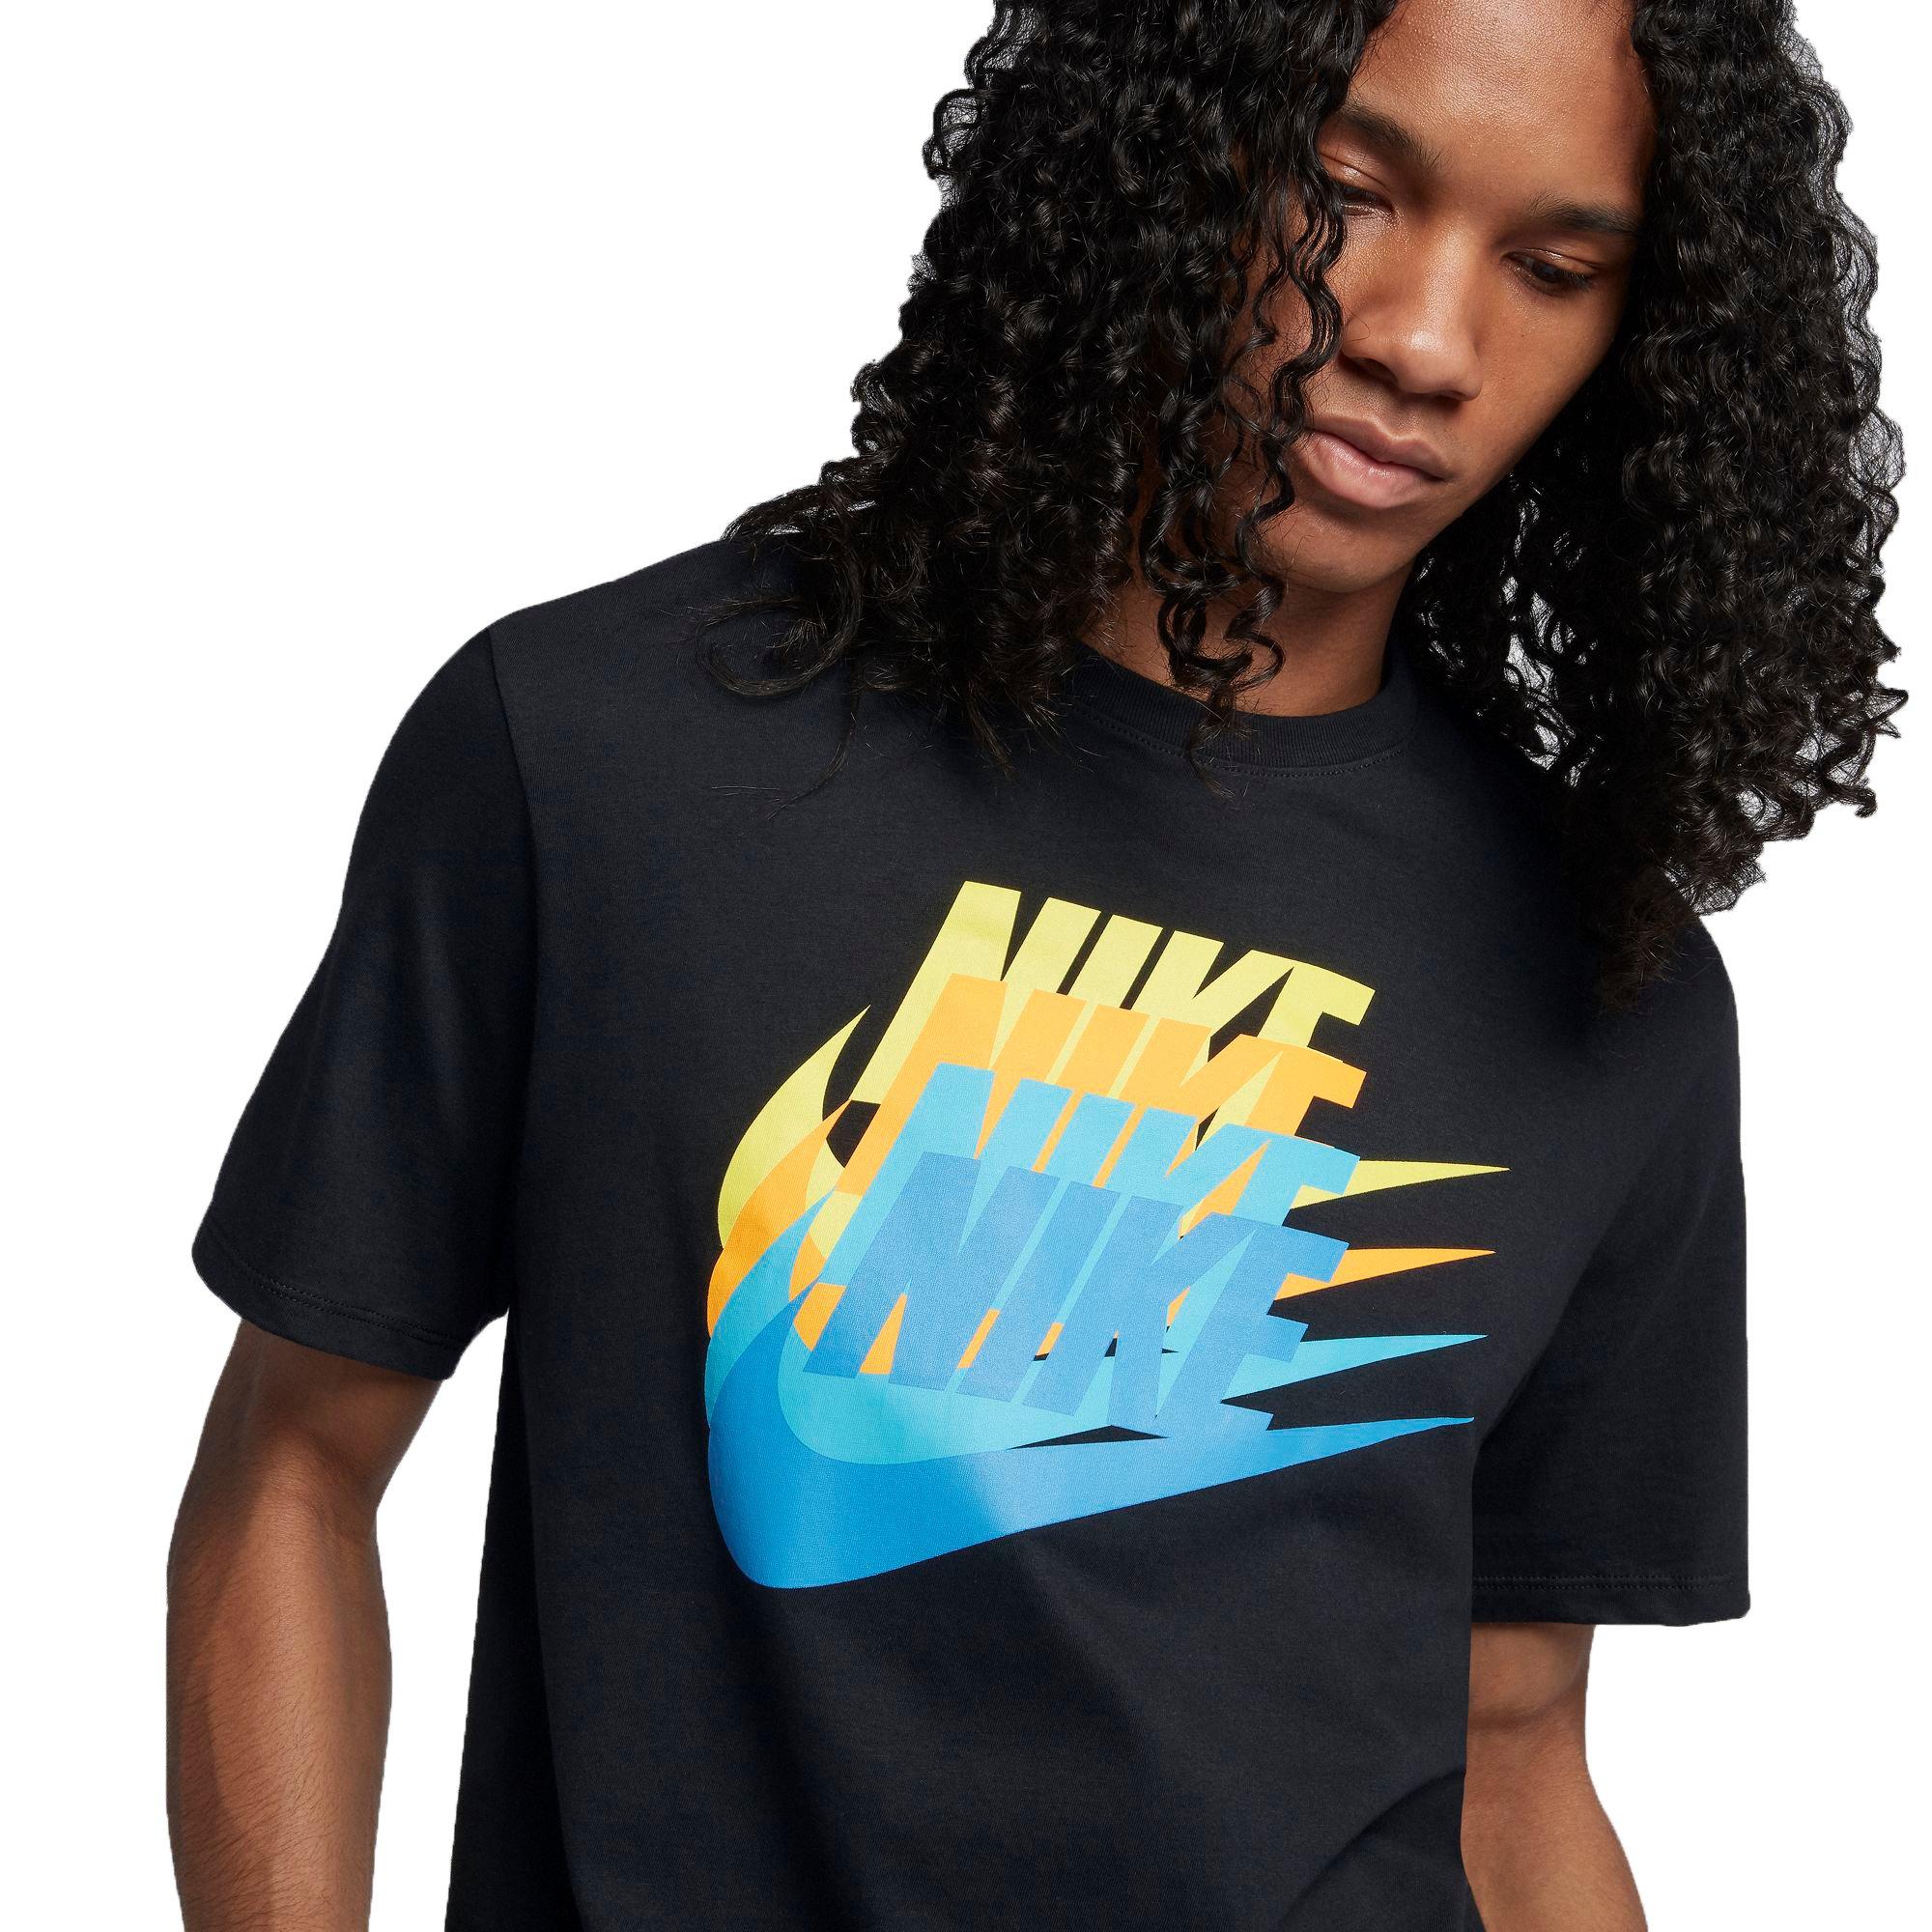 blue and yellow nike t shirt